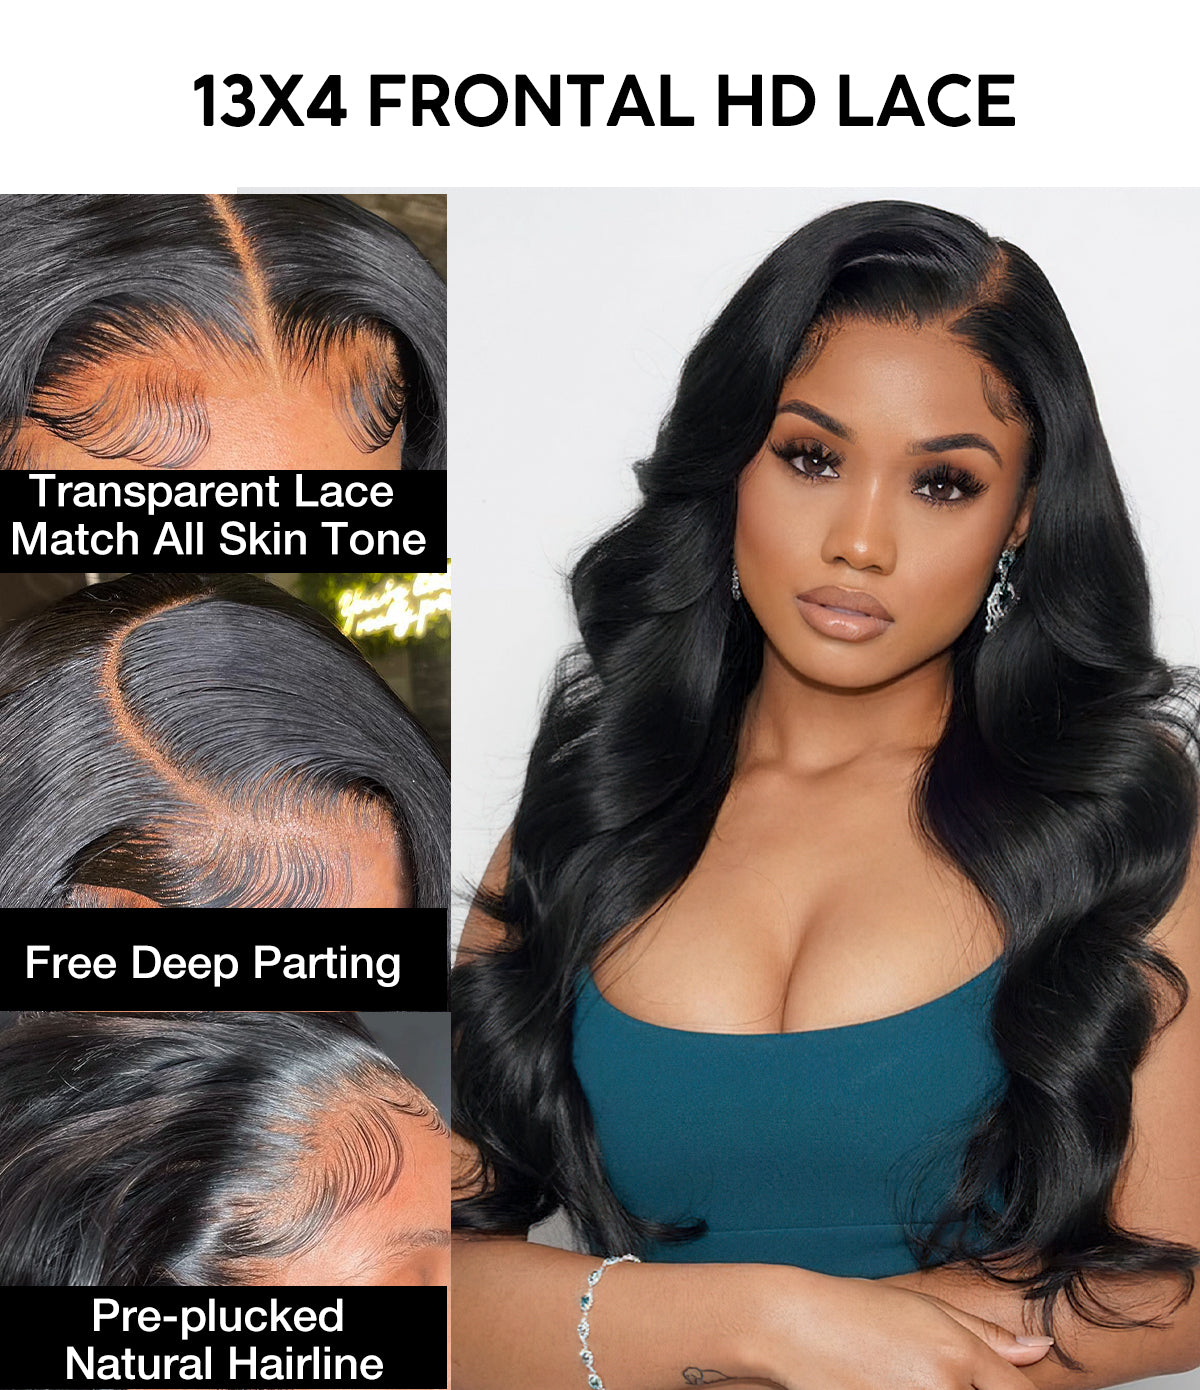 13x4 Frontal HD Lace